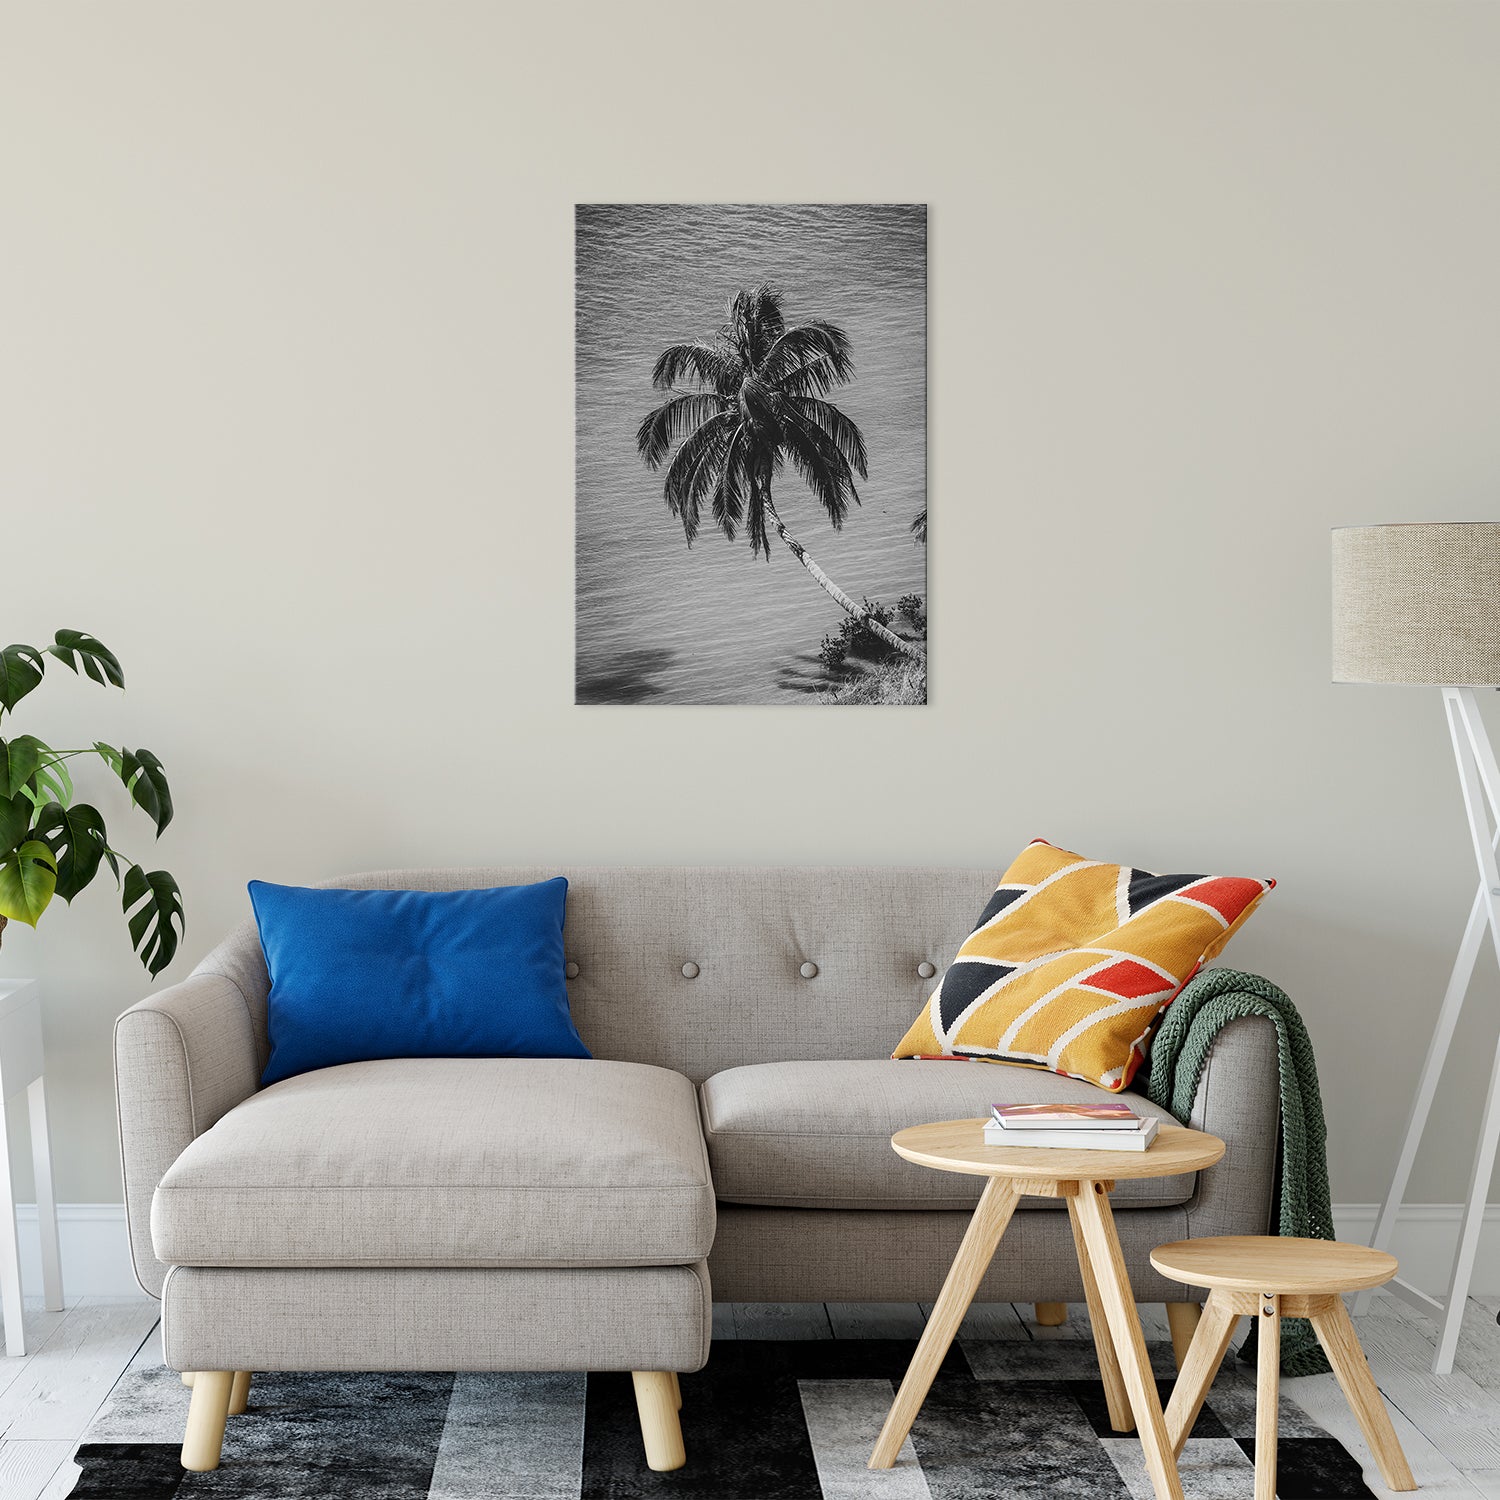 Palm Over Water Black and White Nature / Botanical Photo Fine Art Canvas Wall Art Prints 24" x 36" - PIPAFINEART